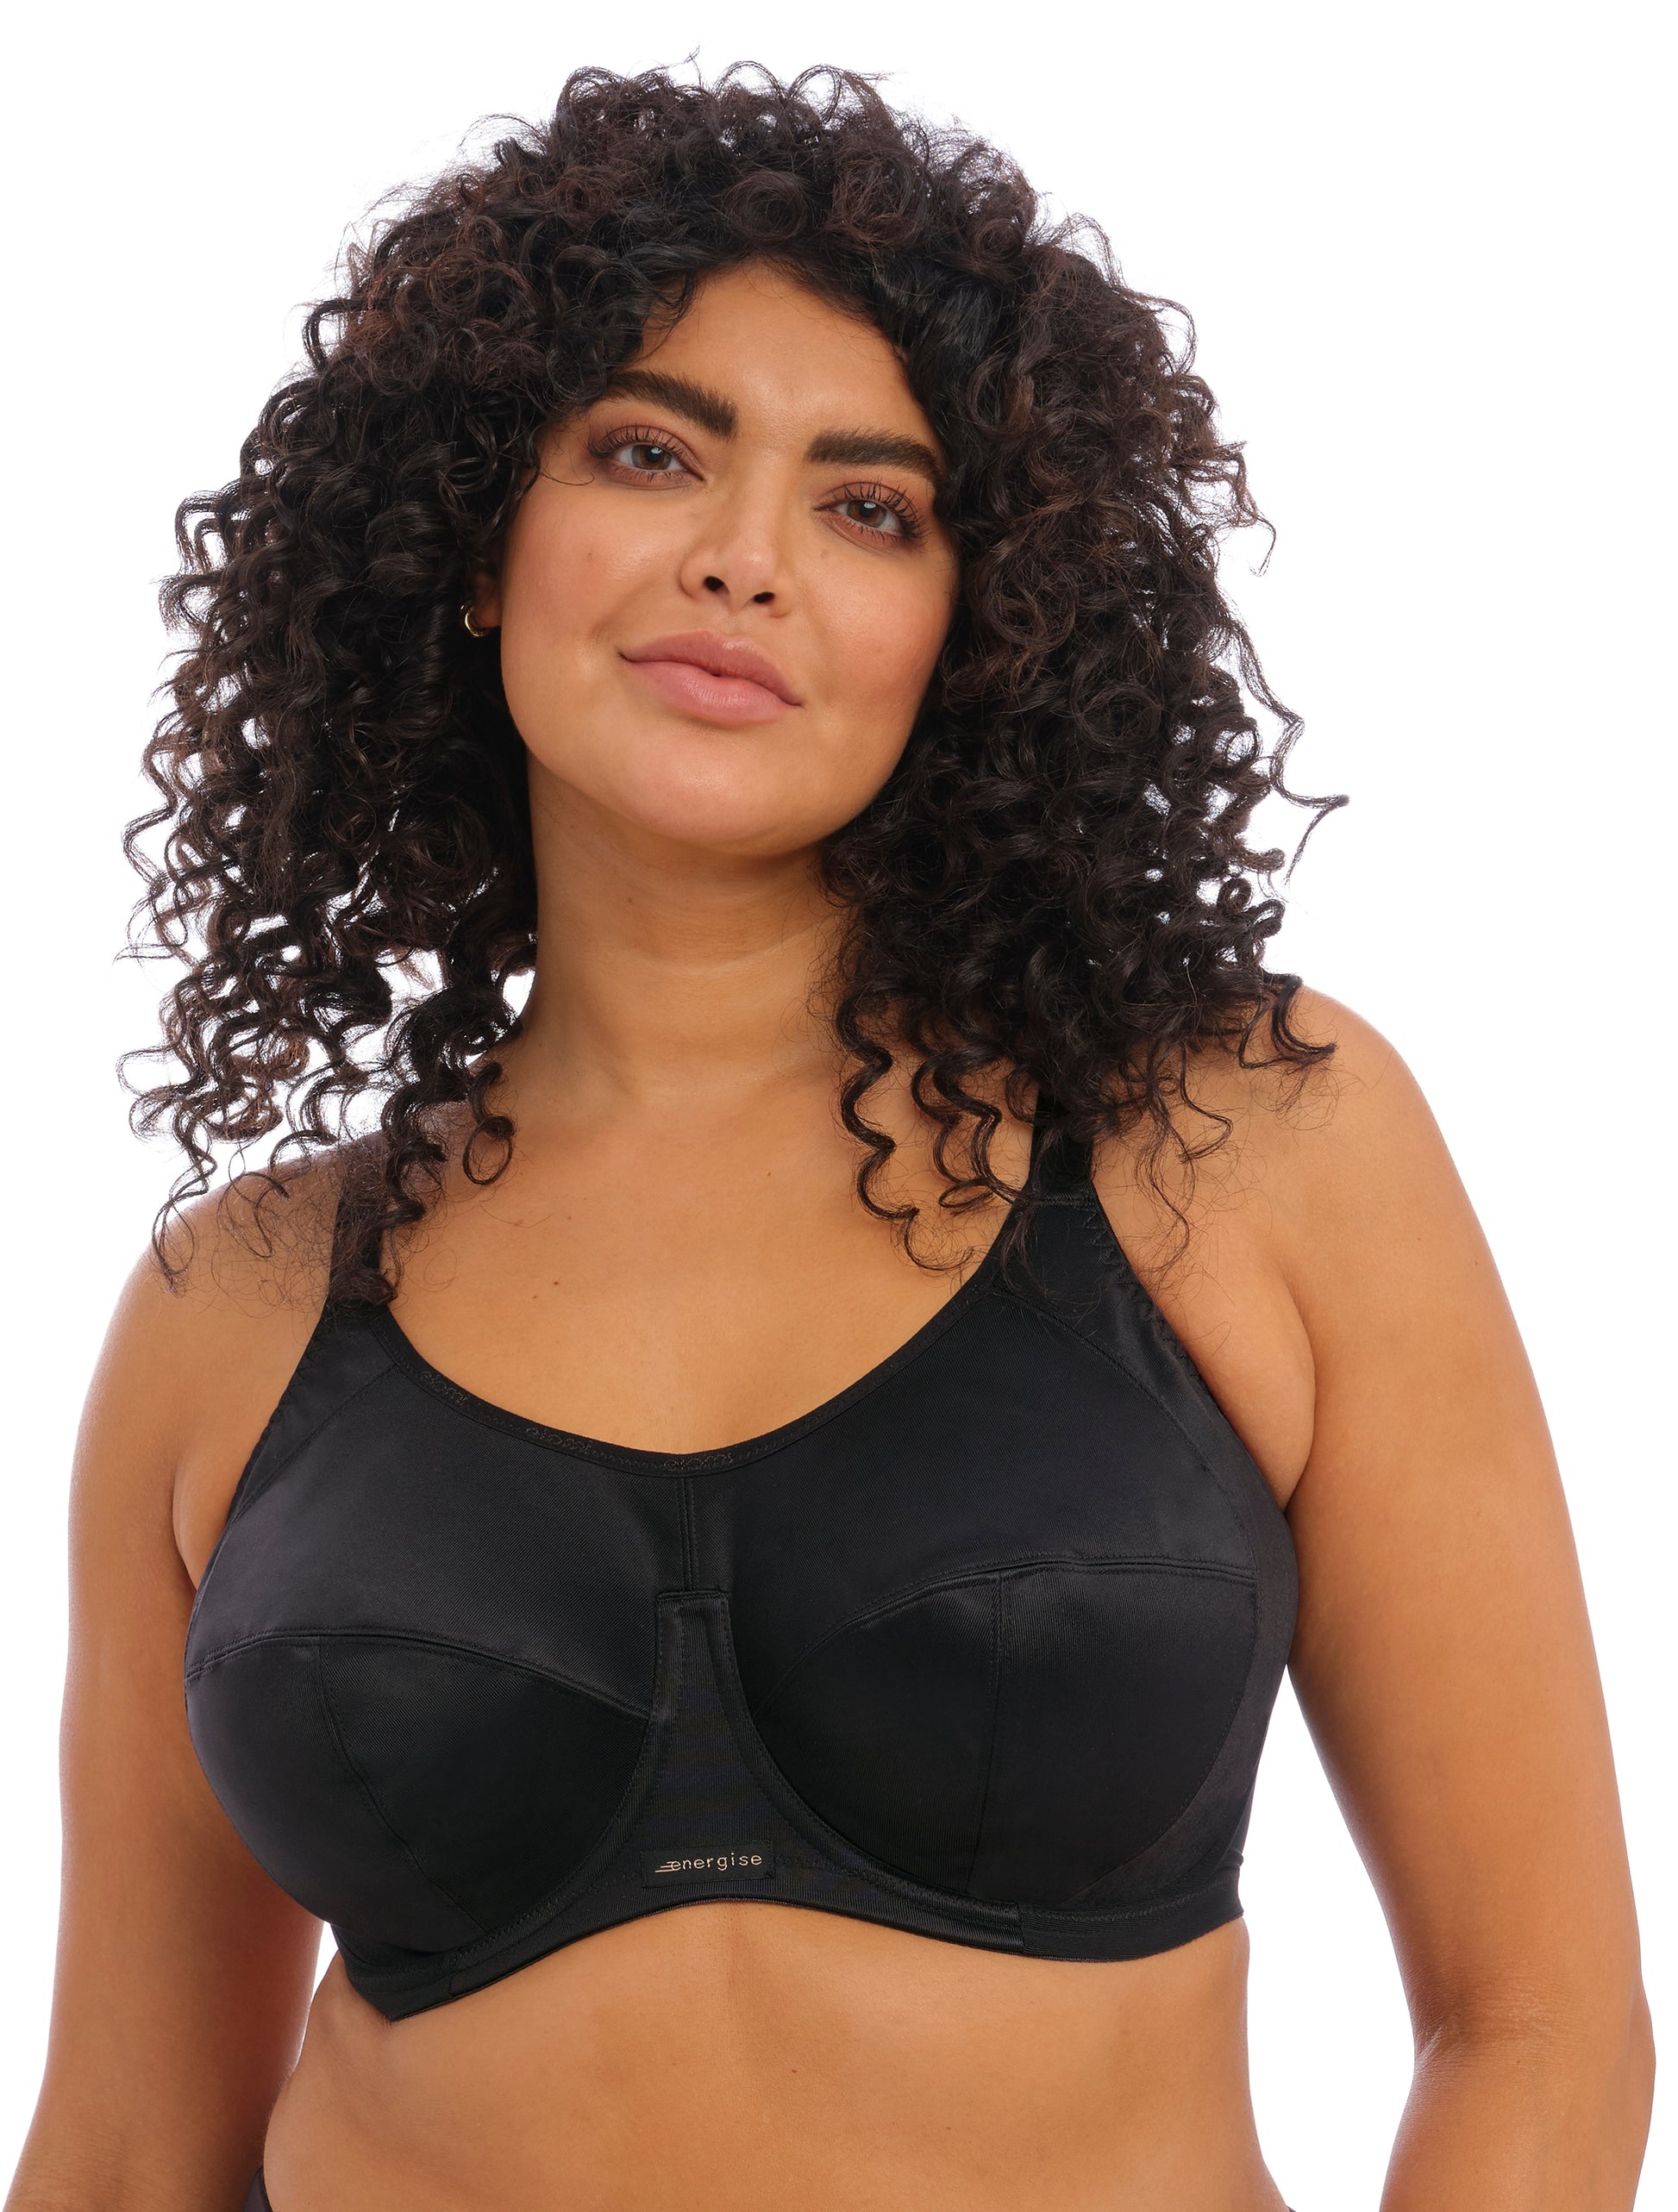 Back Smoothing Bras 32HH, Bras for Large Breasts